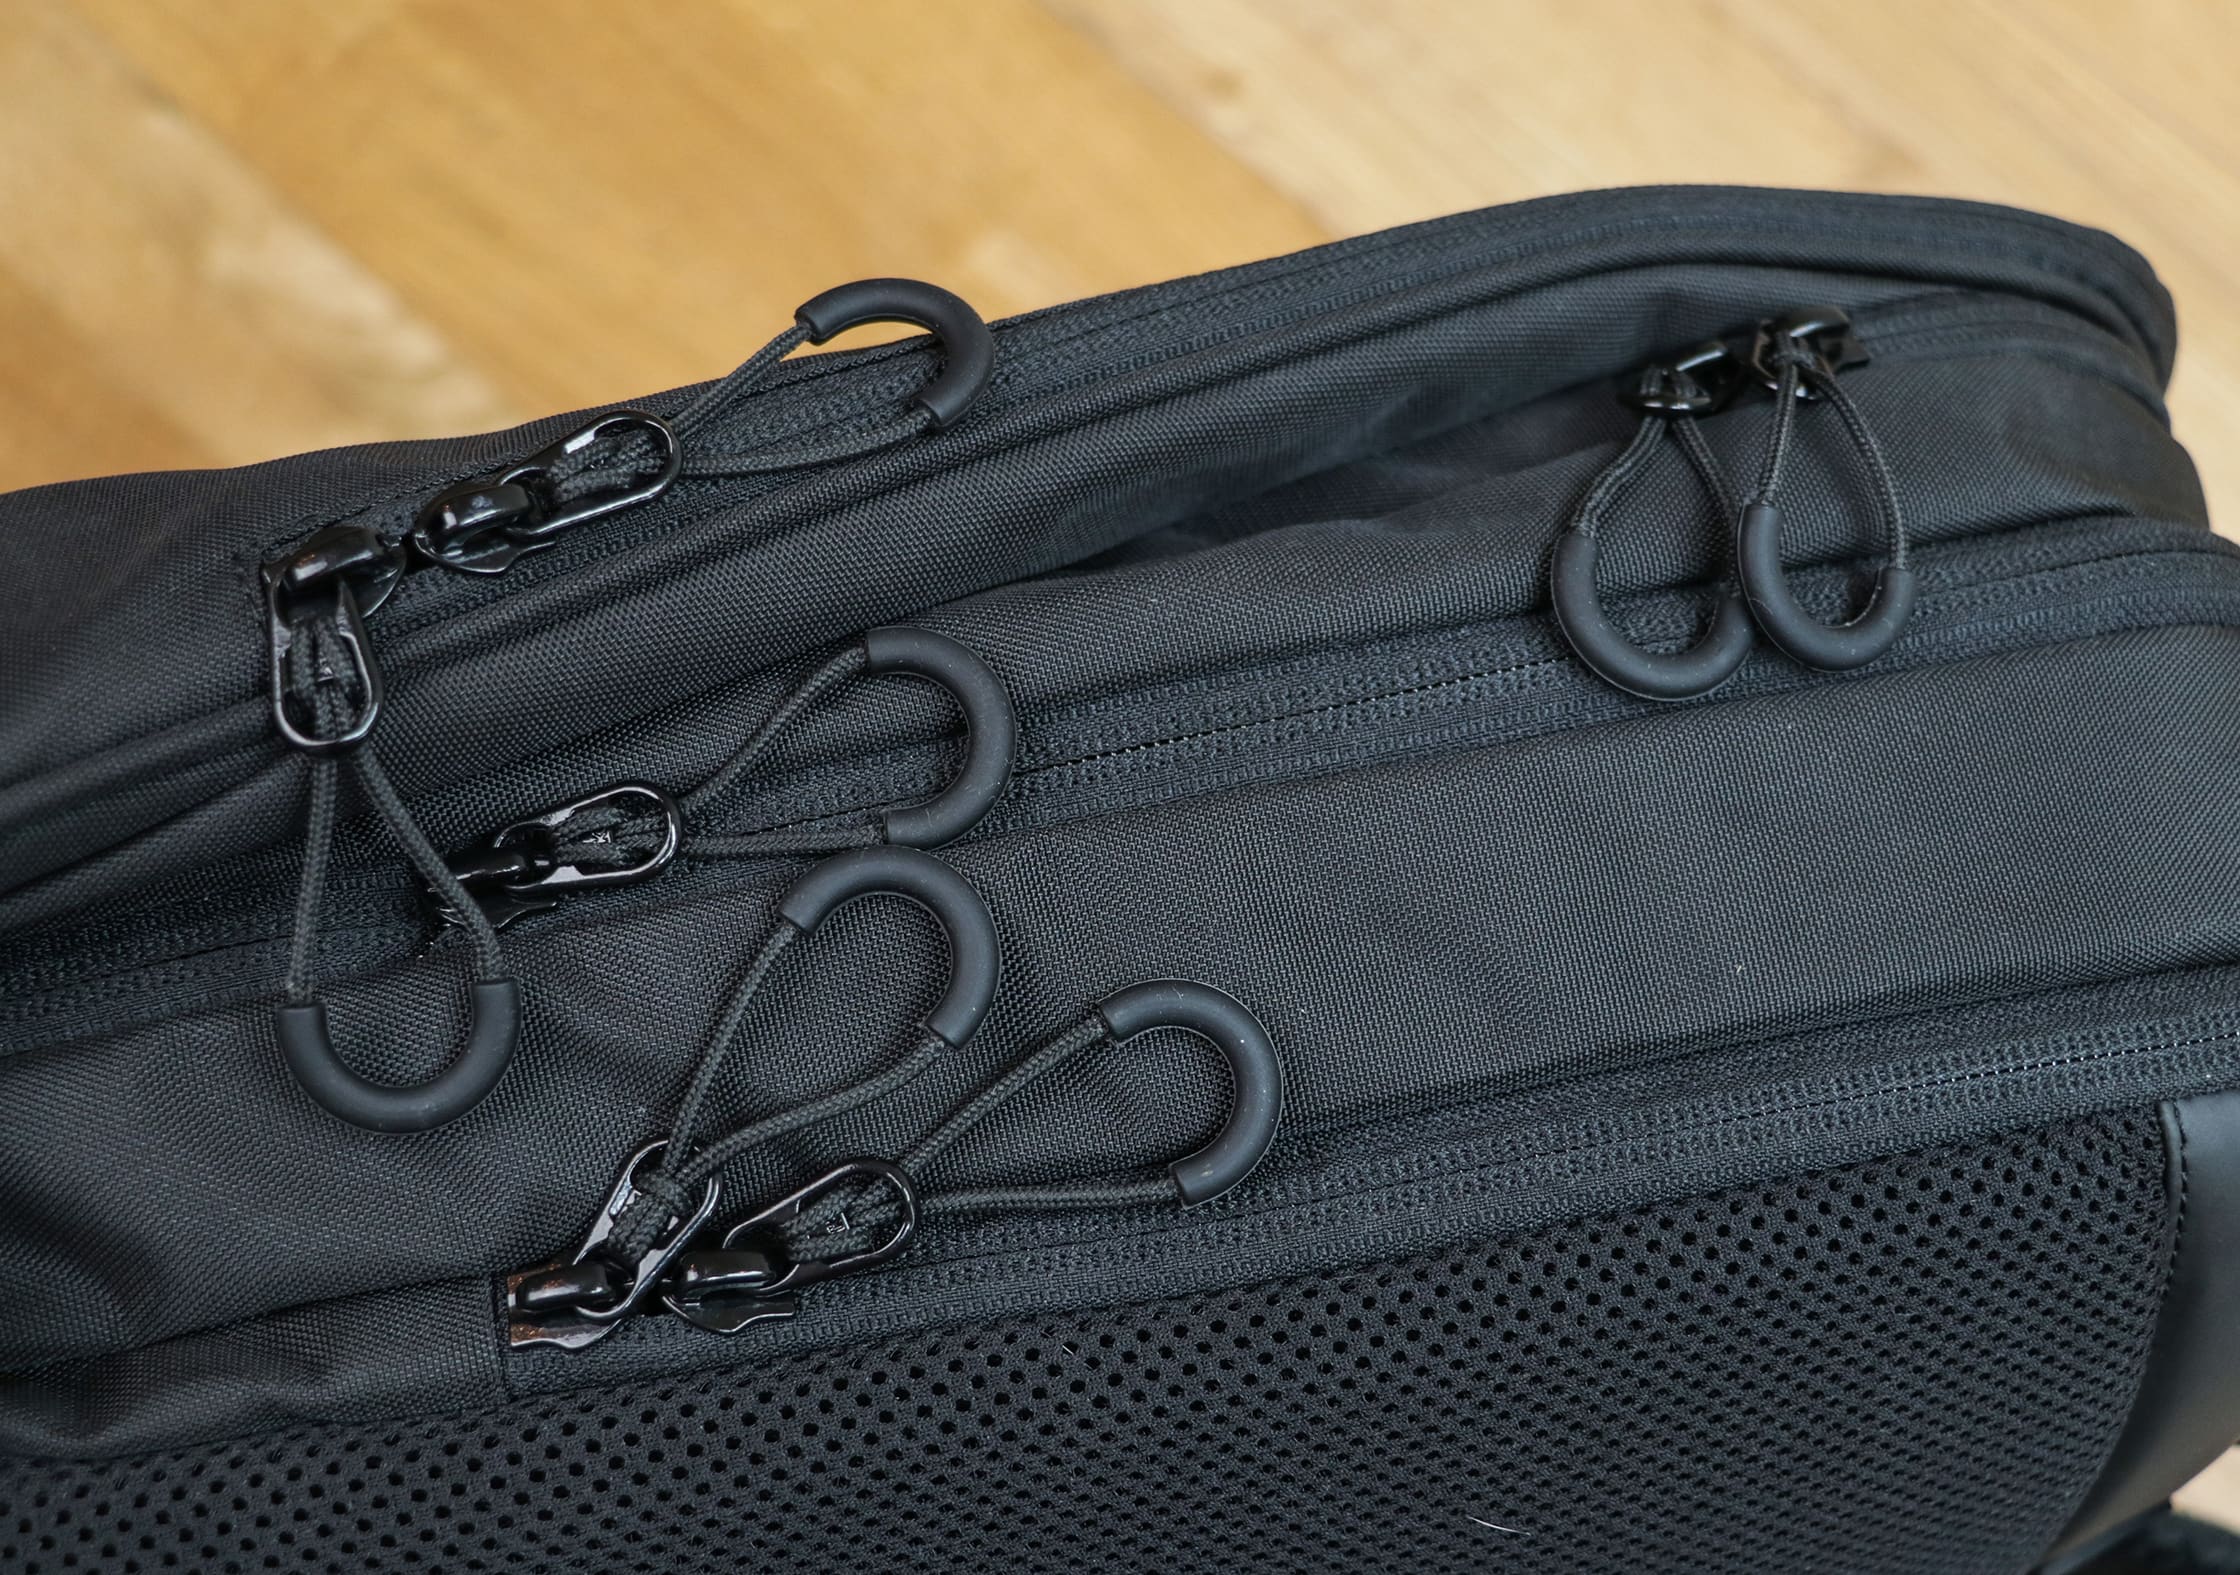 OPPOSETHIS Invisible Carry-On - So Many Zipper Pulls!